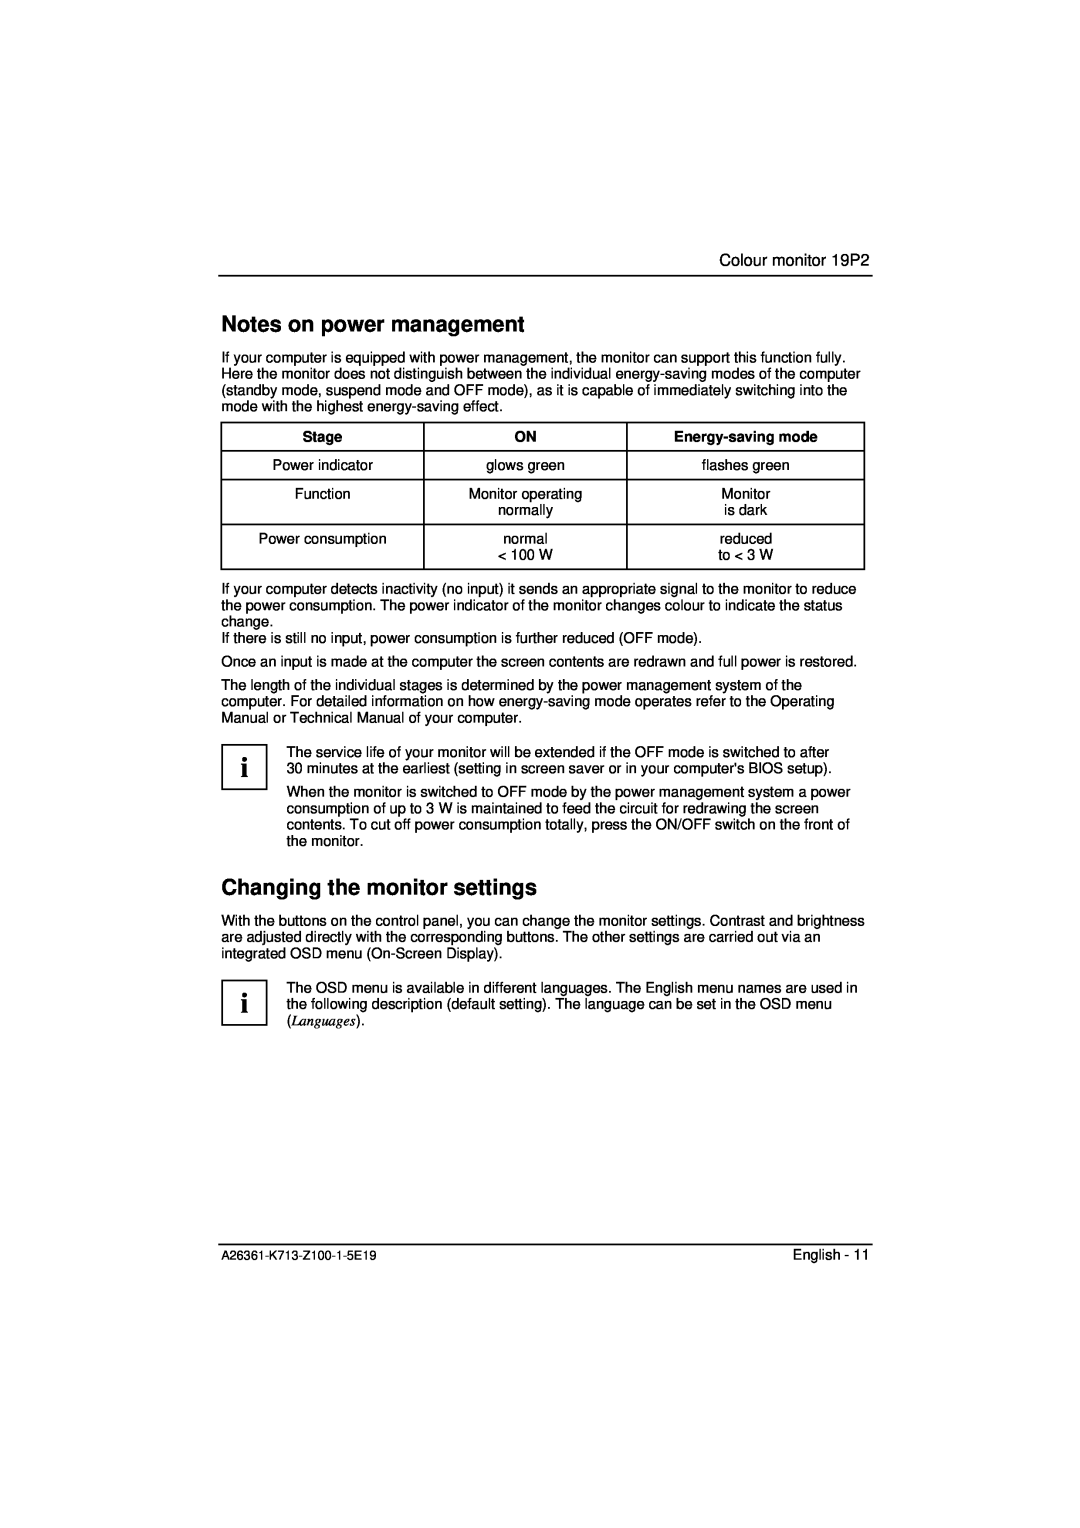 Fujitsu Siemens Computers 19P2 manual Notes on power management, Changing the monitor settings, Stage, Energy-saving mode 